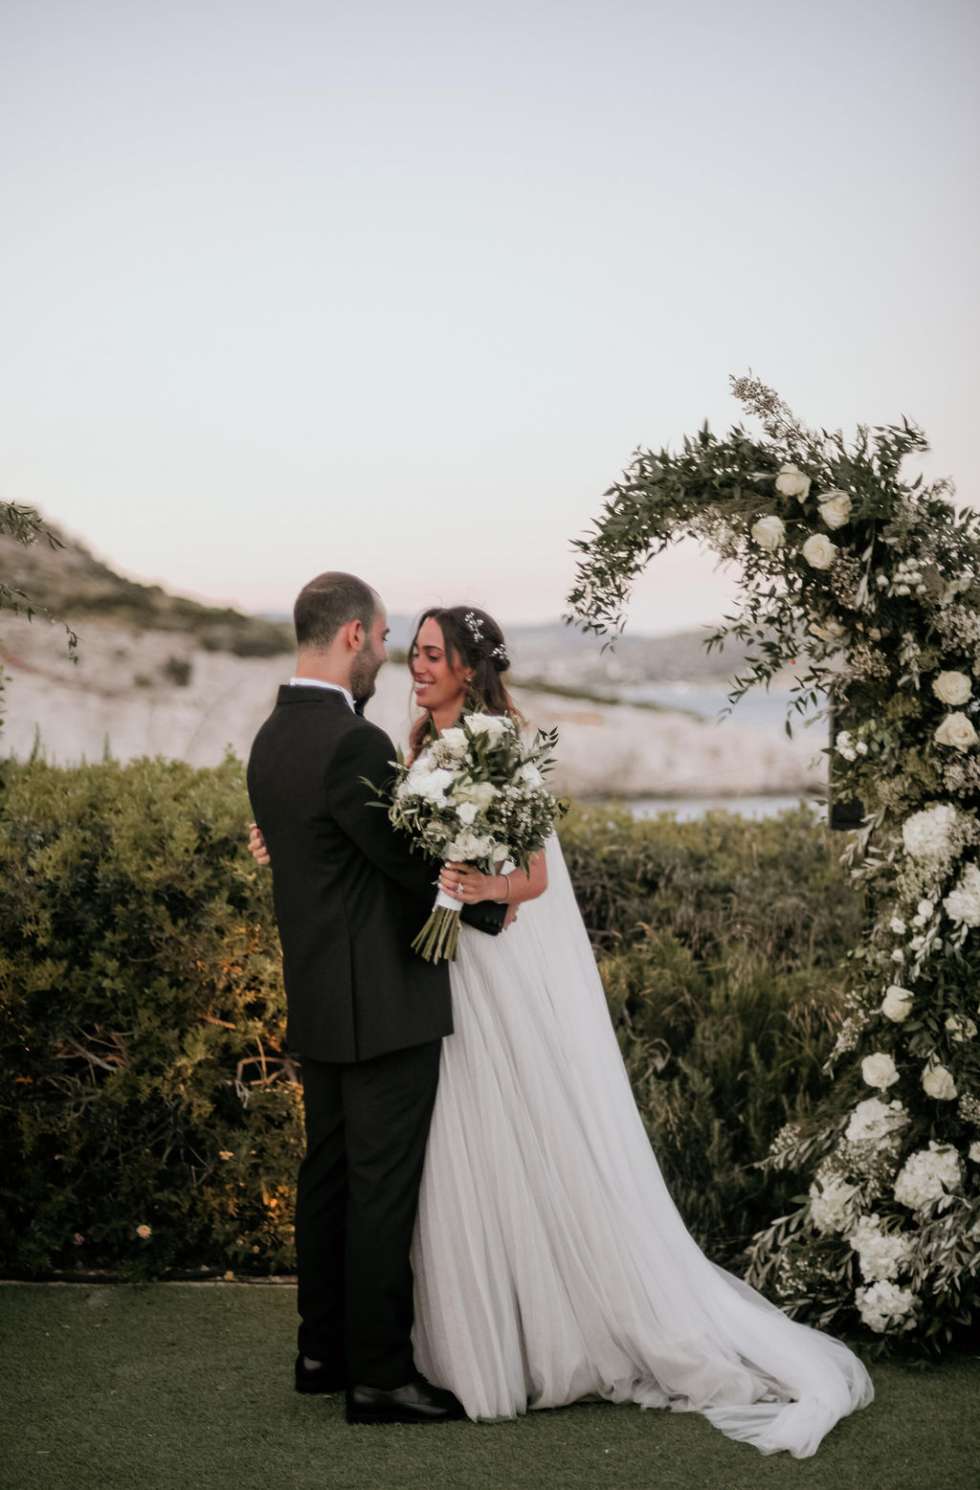 An Olive Inspired Lebanese Wedding in Athens Riviera